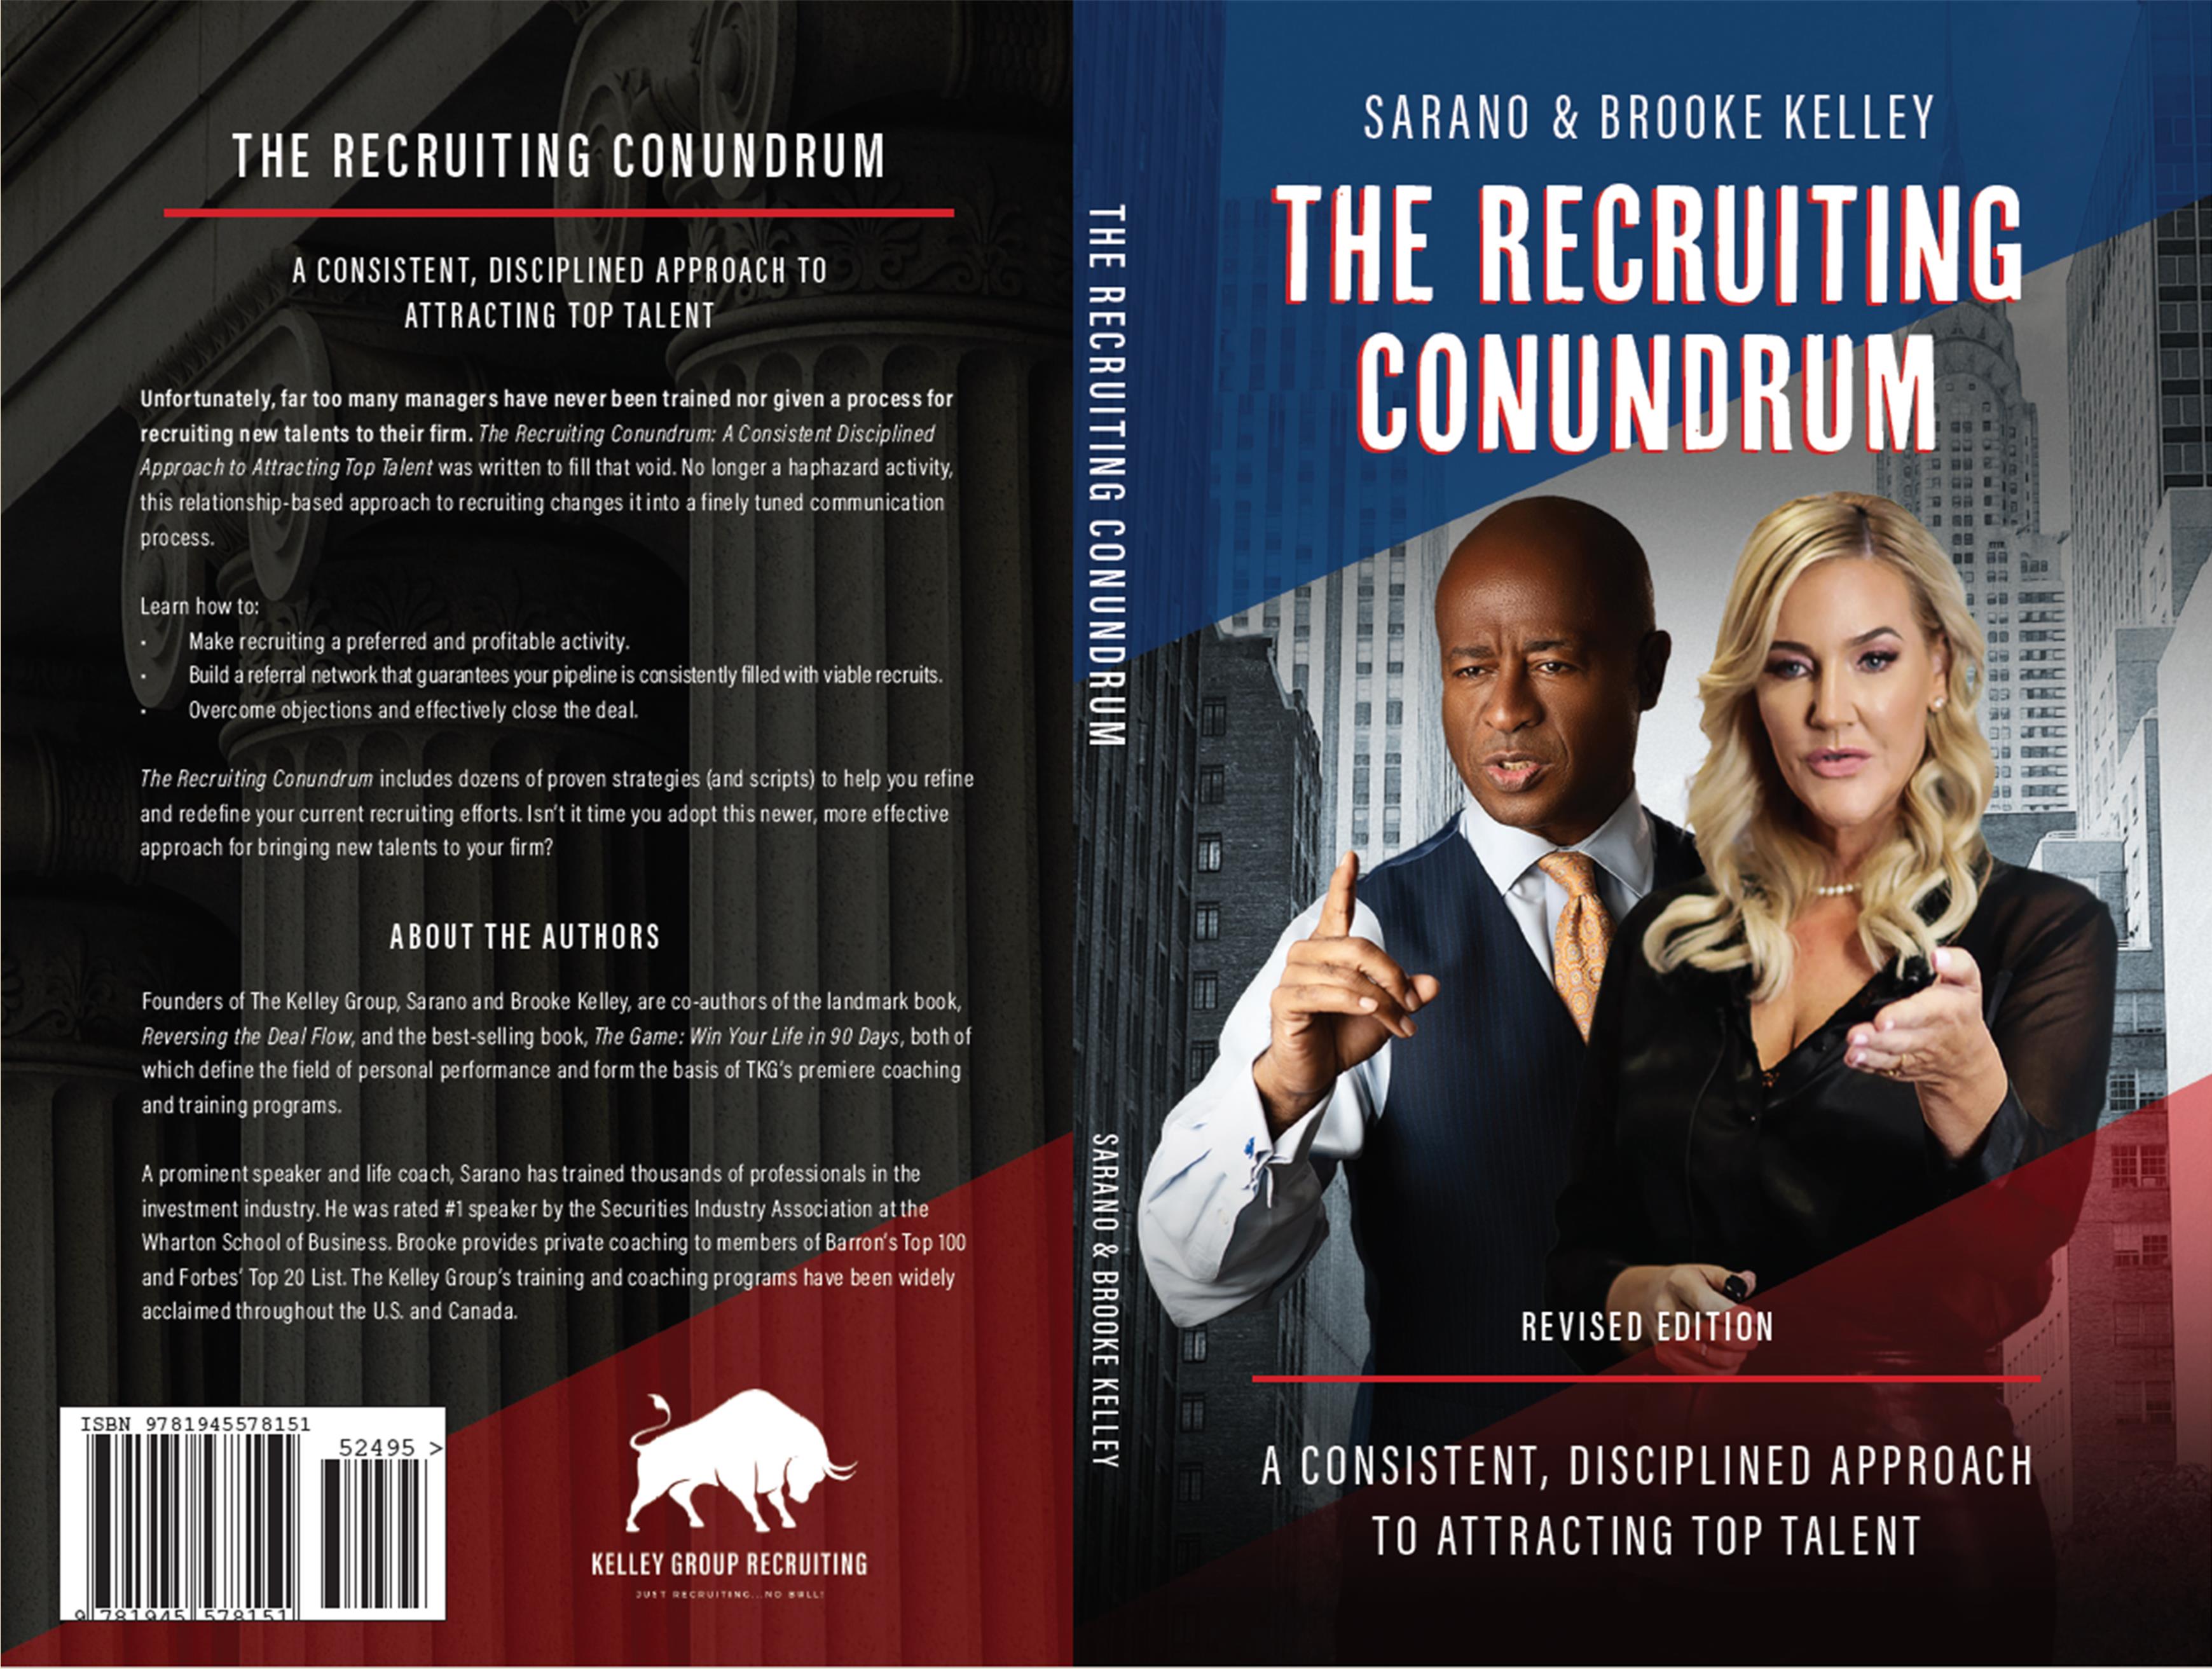 The Recruiting Conundrum cover image